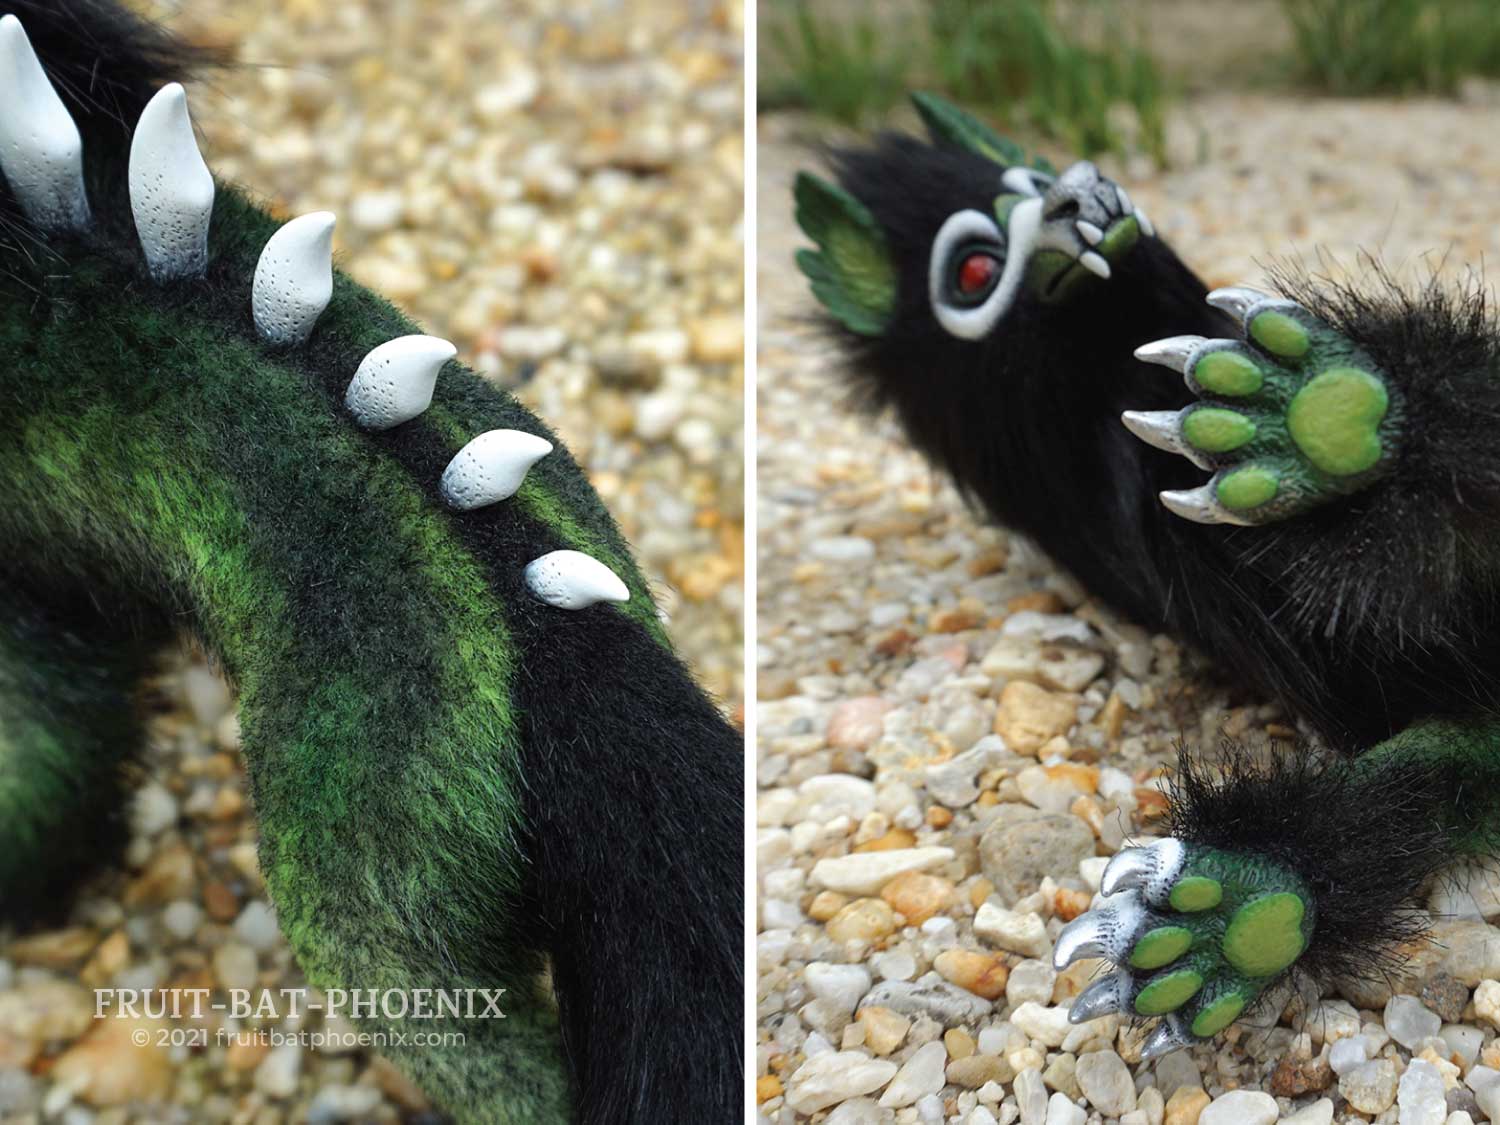 Green Bonewolf (Canis Osteus) paw pads and spines details